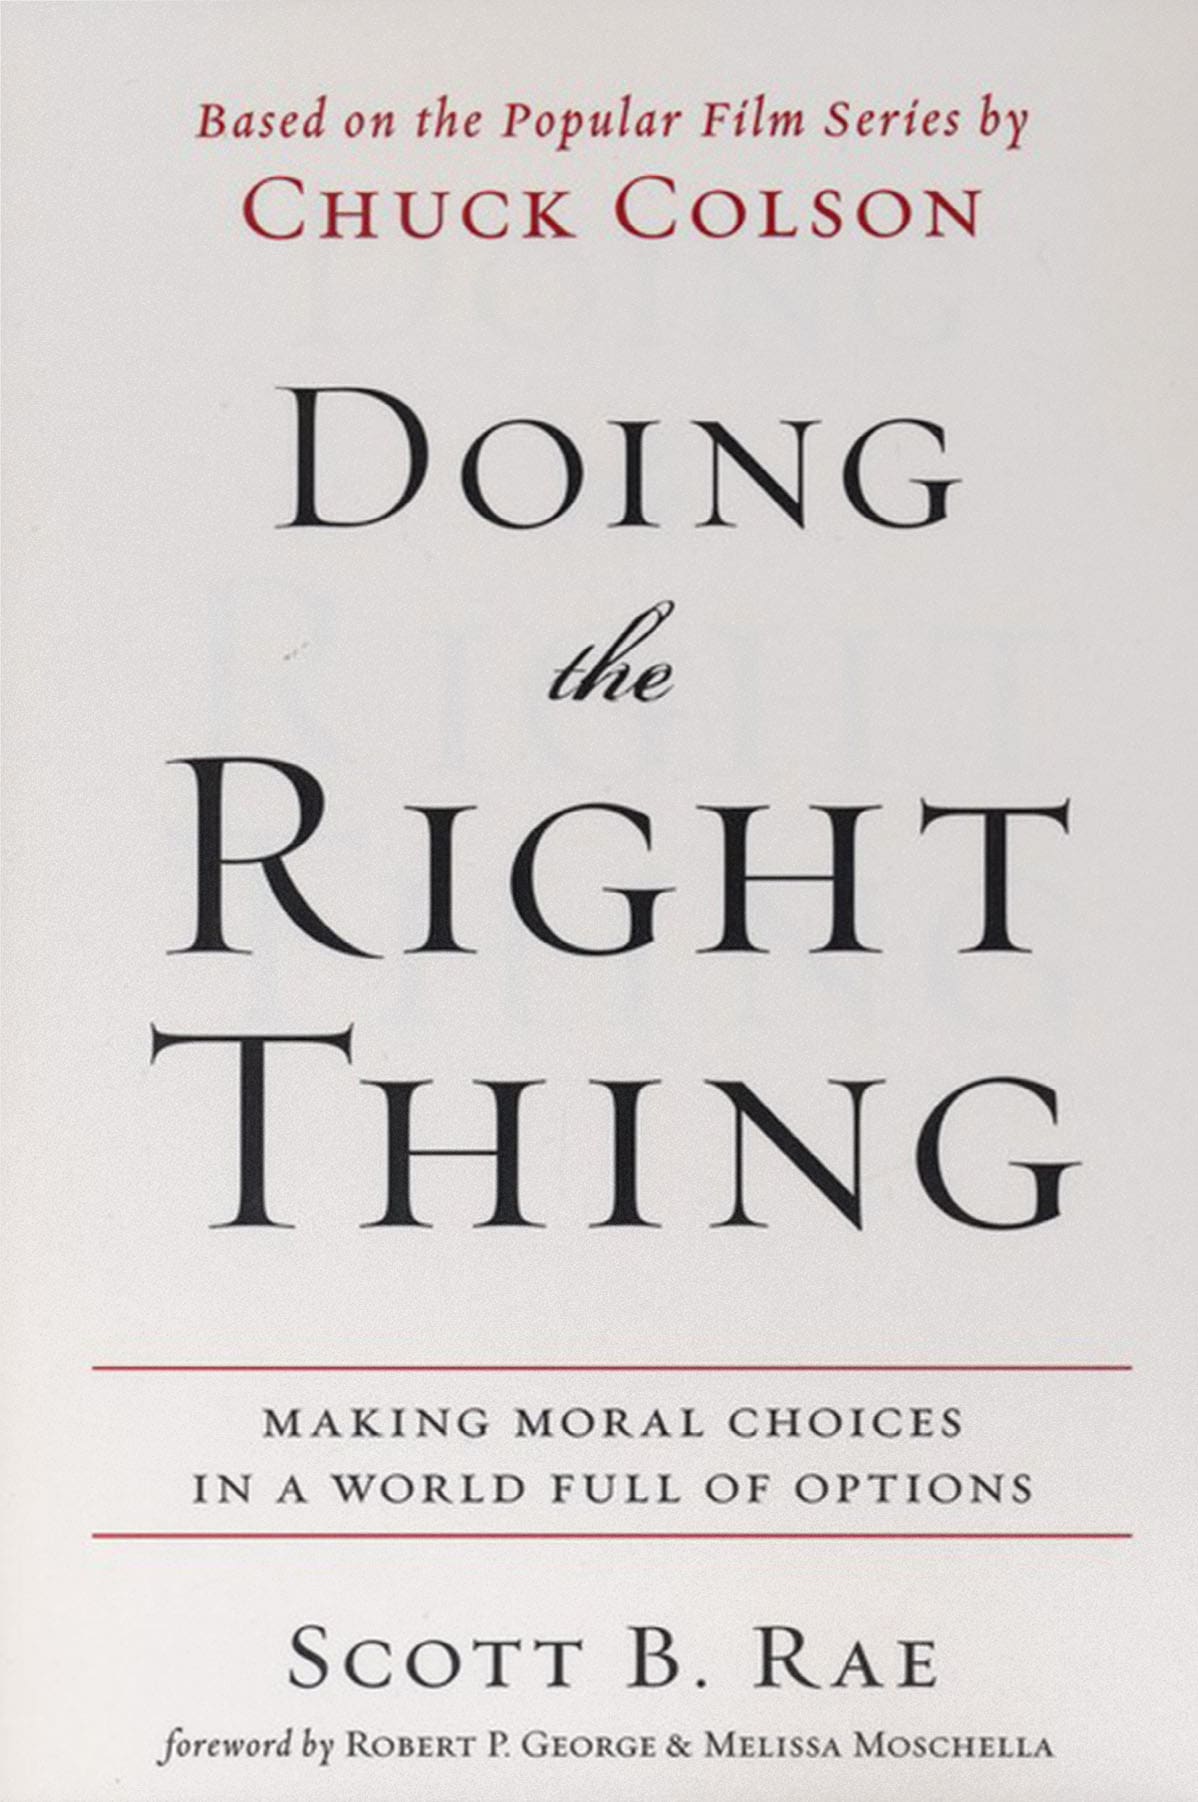 Doing-the-right-thing2